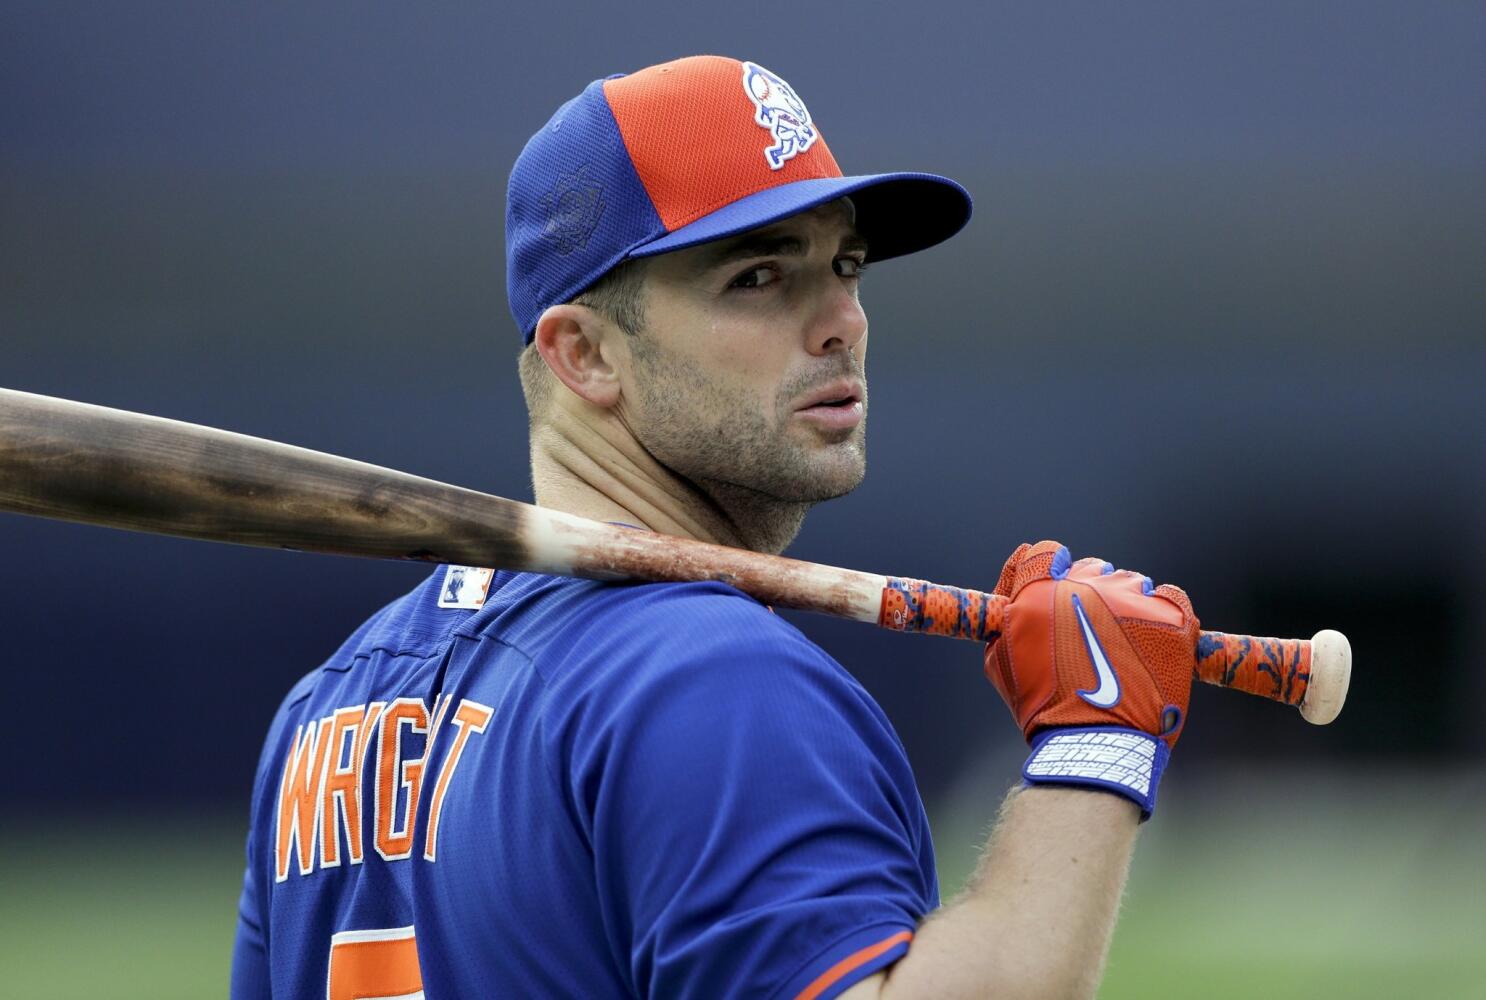 Mets All-Star Wright released from hospital - The San Diego Union-Tribune